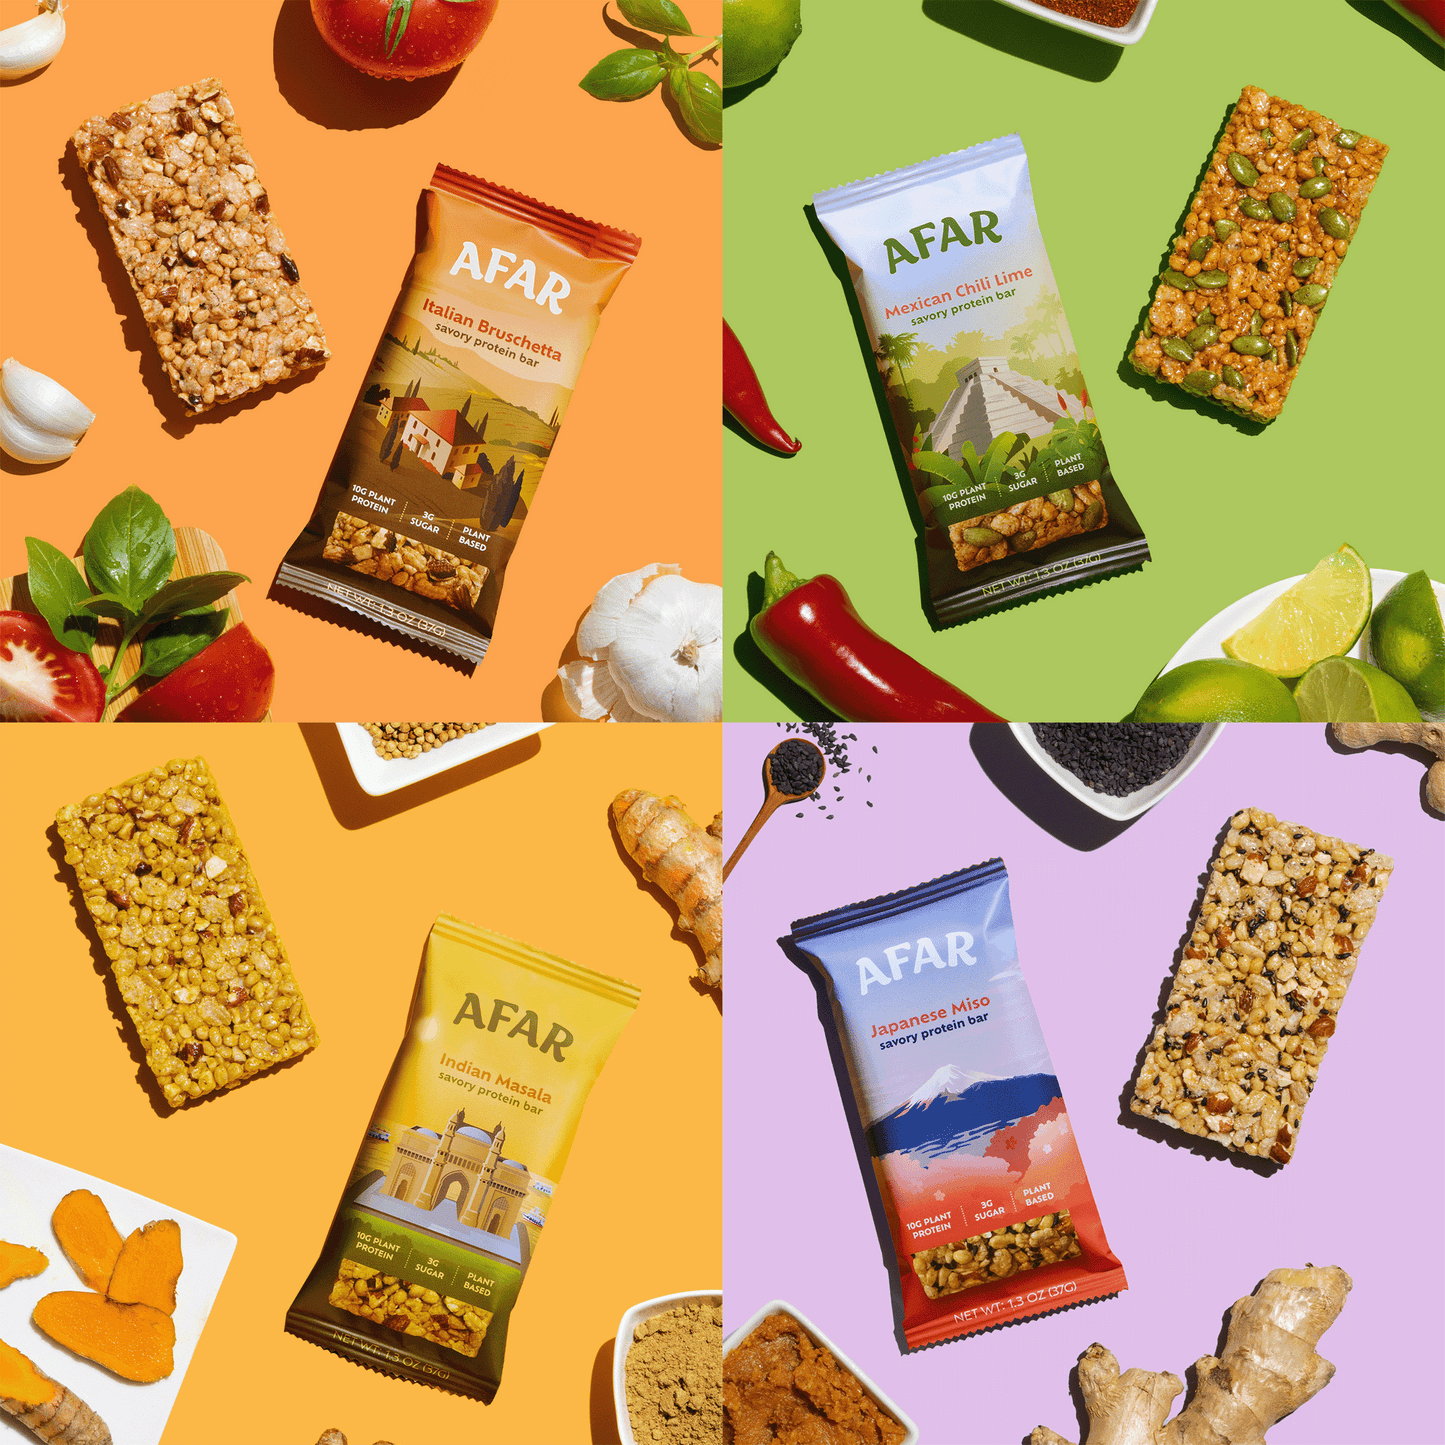 Afar savory protein bars are savory, crispy, and low sugar. Each bar is vegan and gluten-free, packing 10g protein and only 3g sugar. They're great to snack on whenever, wherever - in the office, on the road, after a workout, or in place of a meal. The perfect healthy snack for adults!